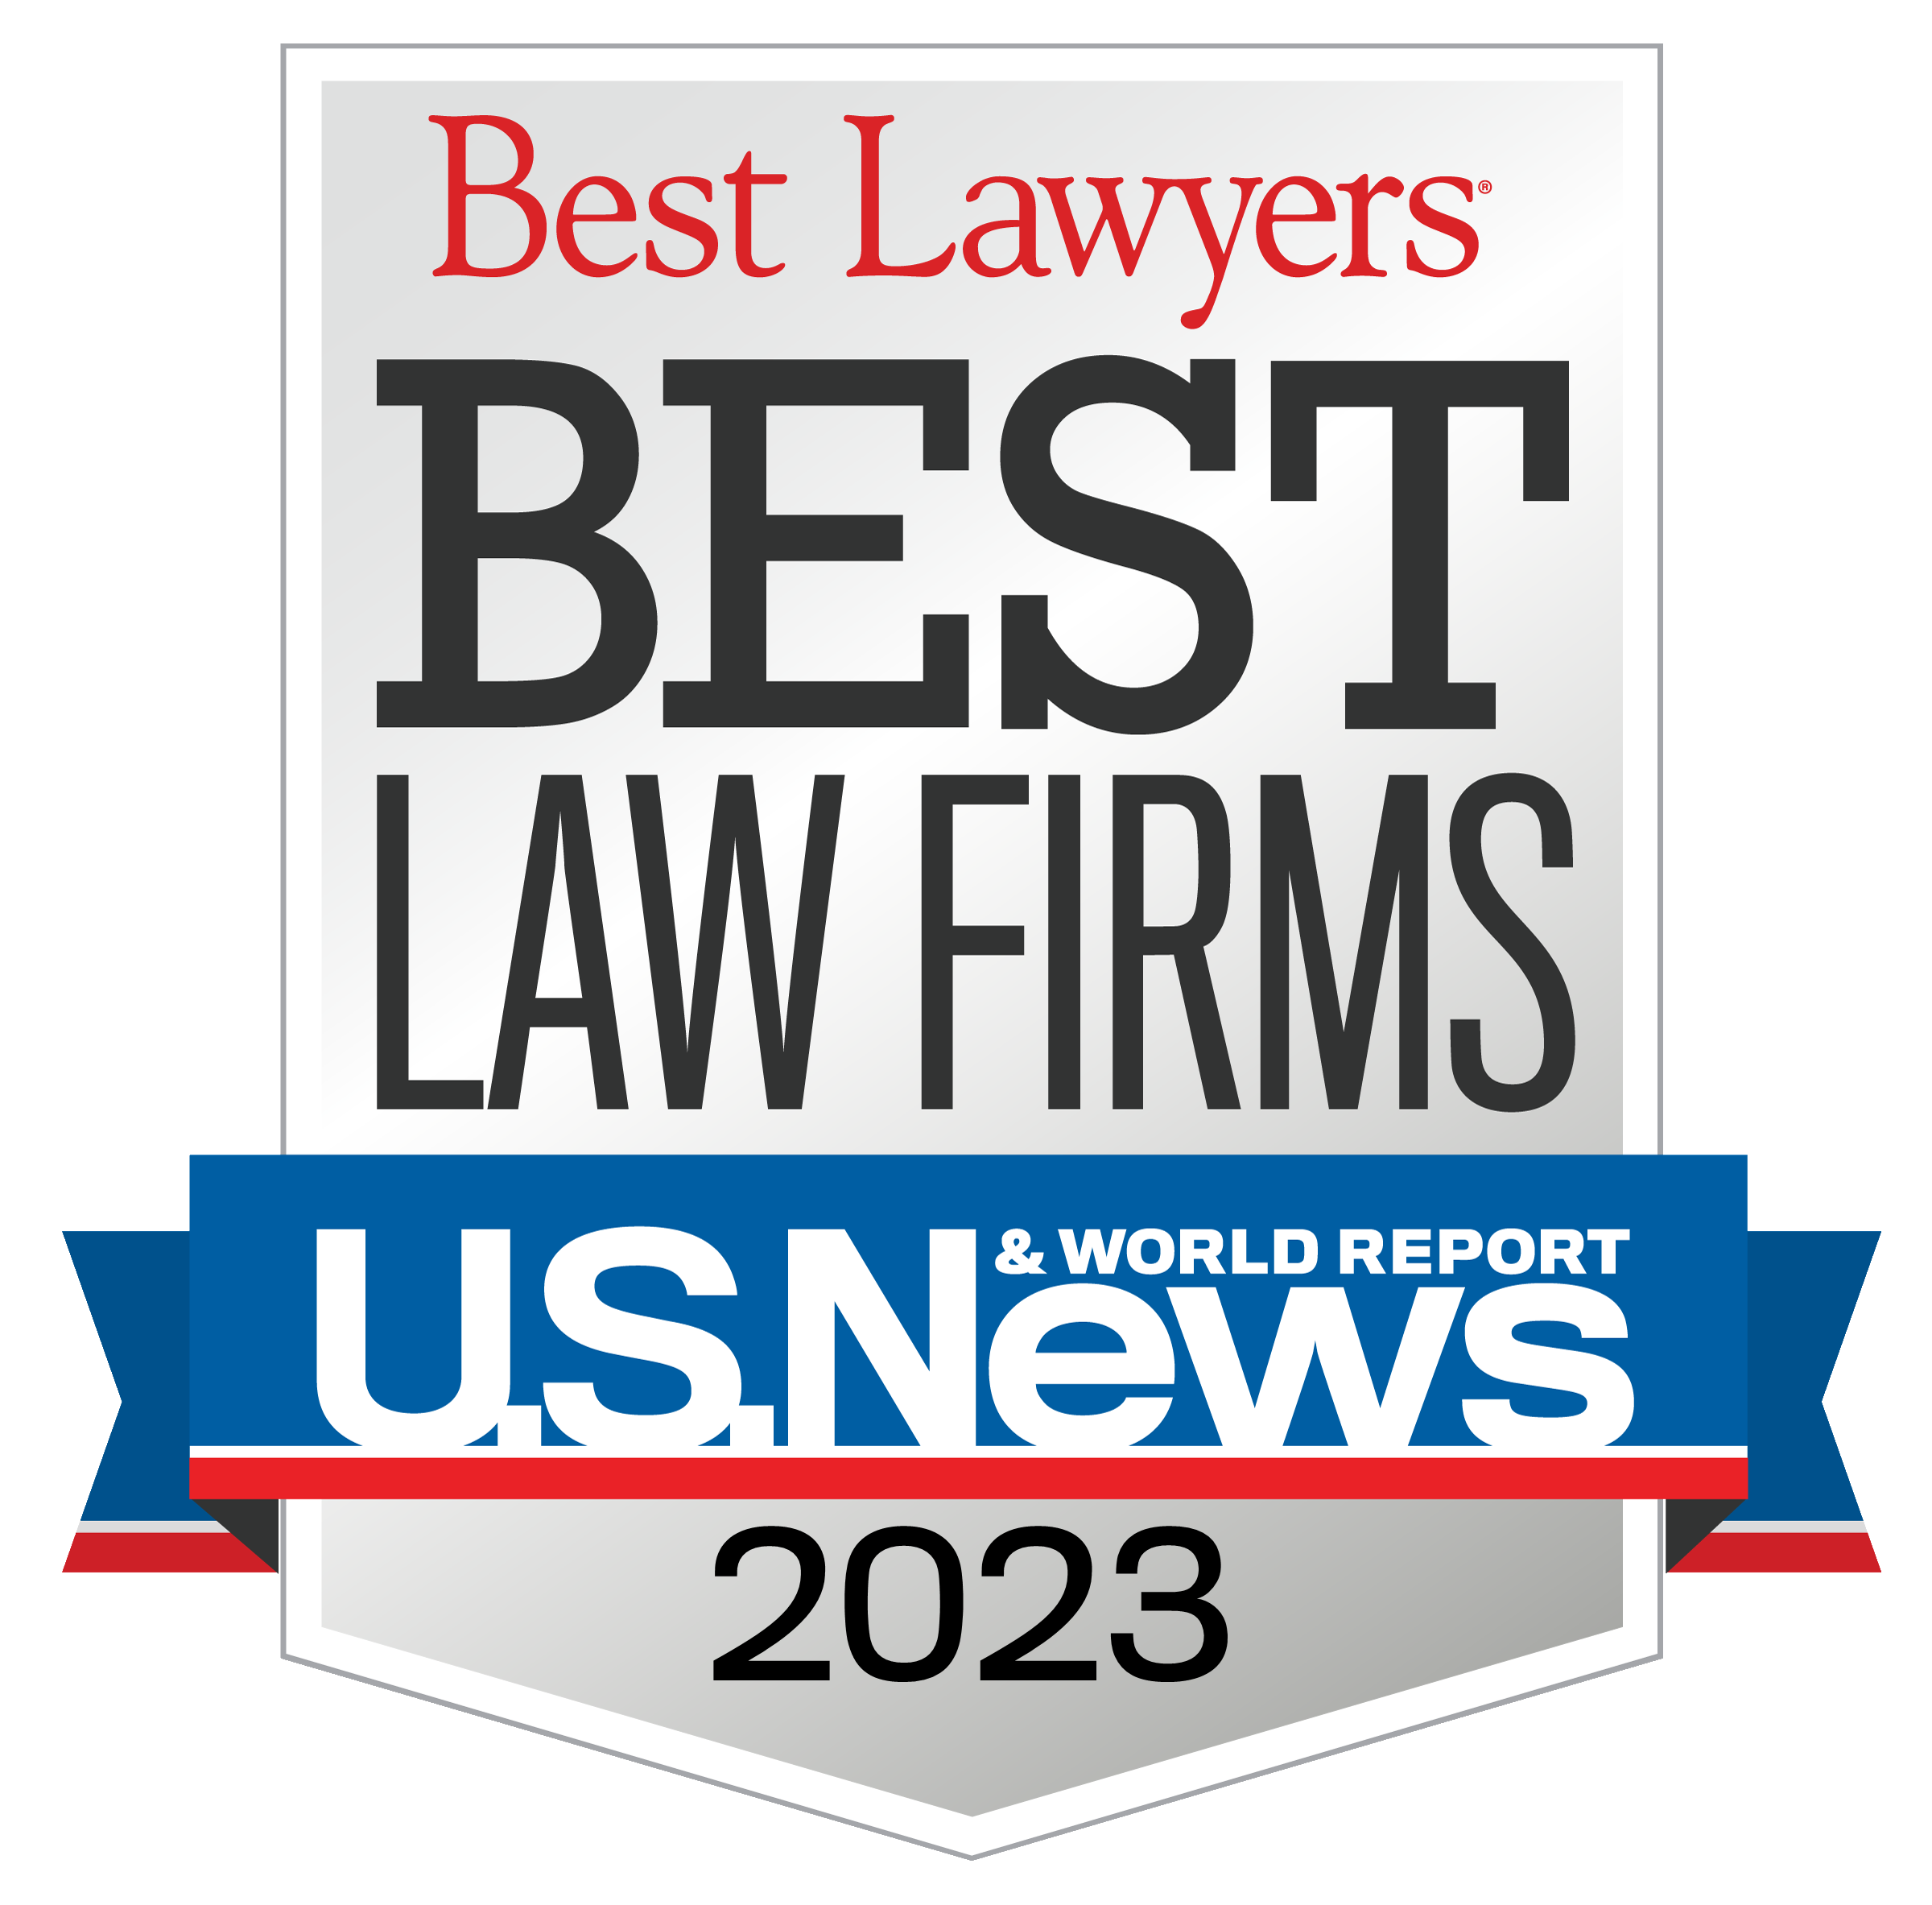 US News Best Law Firms 2023